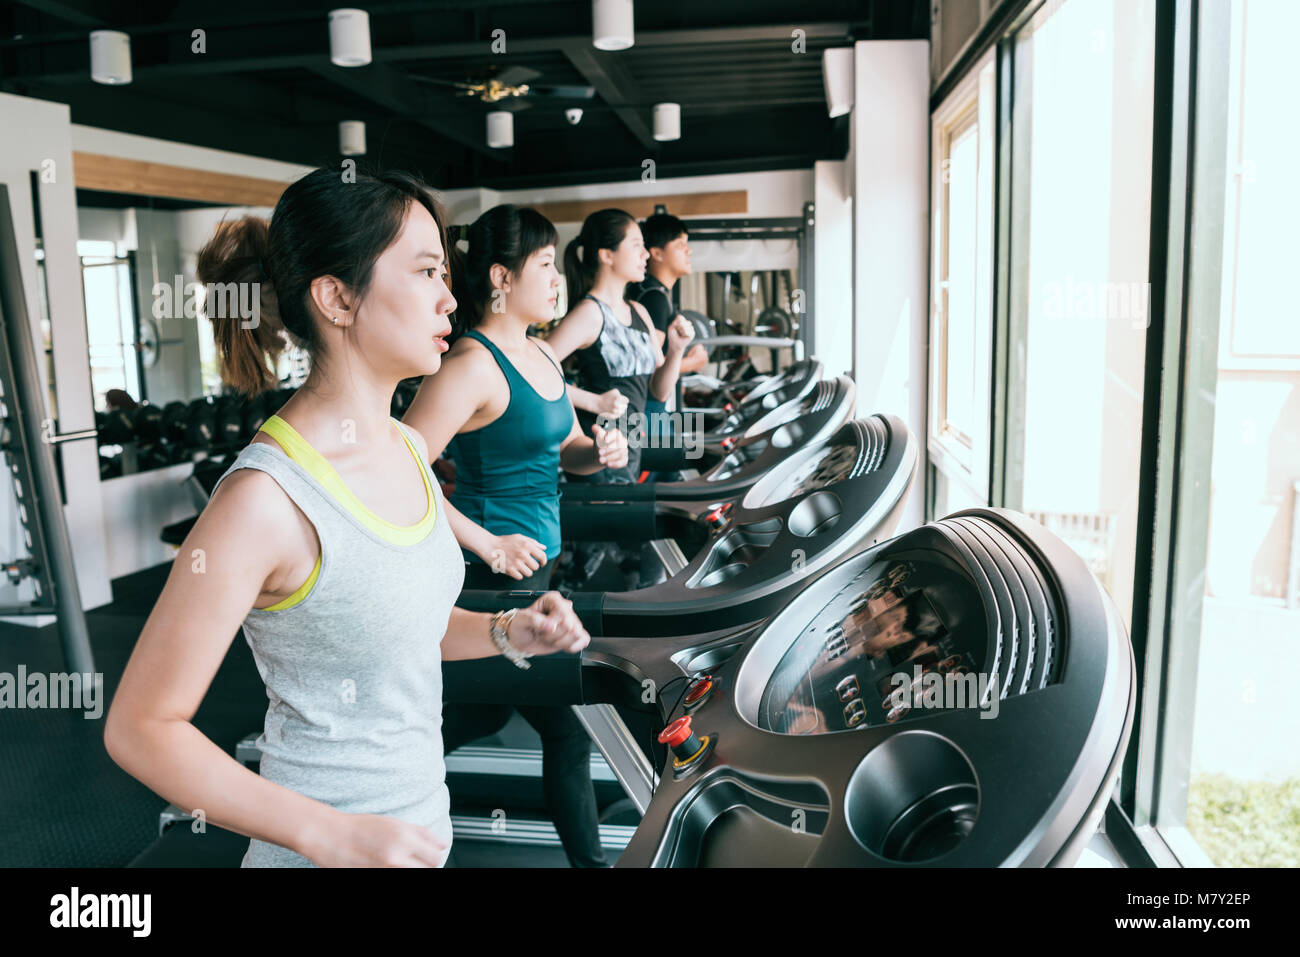 group of women and a man running on treadmill in fitness club, exercising to lose weight and gain more fitness. Stock Photo